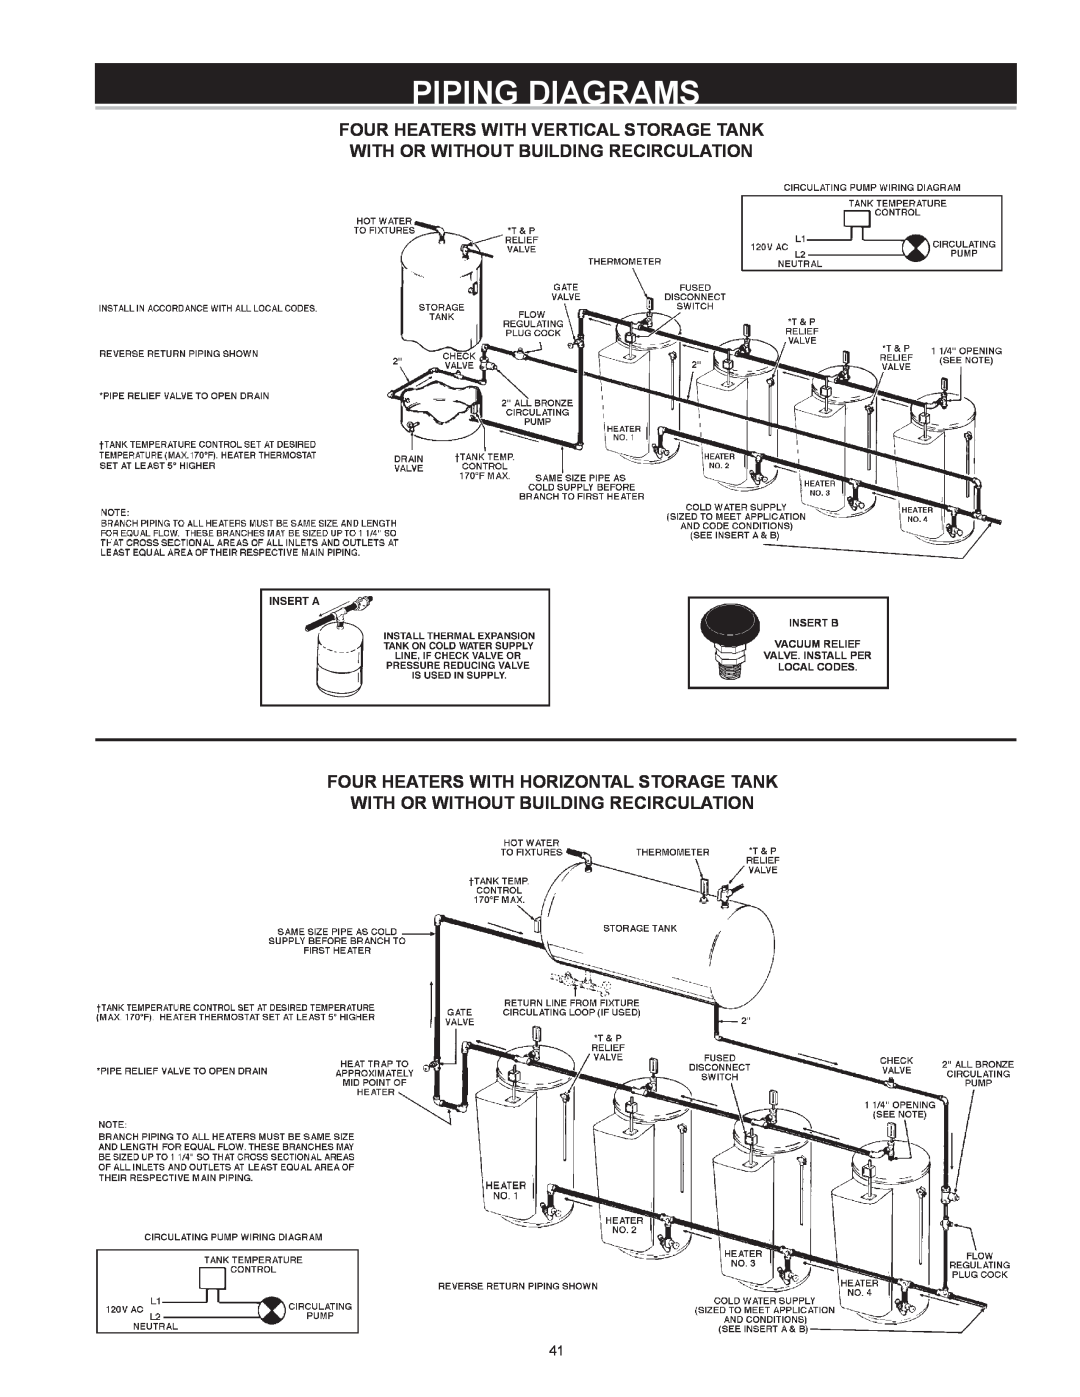 A.O. Smith Dve-52/80/120 instruction manual Four Heaters With Horizontal Storage Tank, Piping Diagrams 